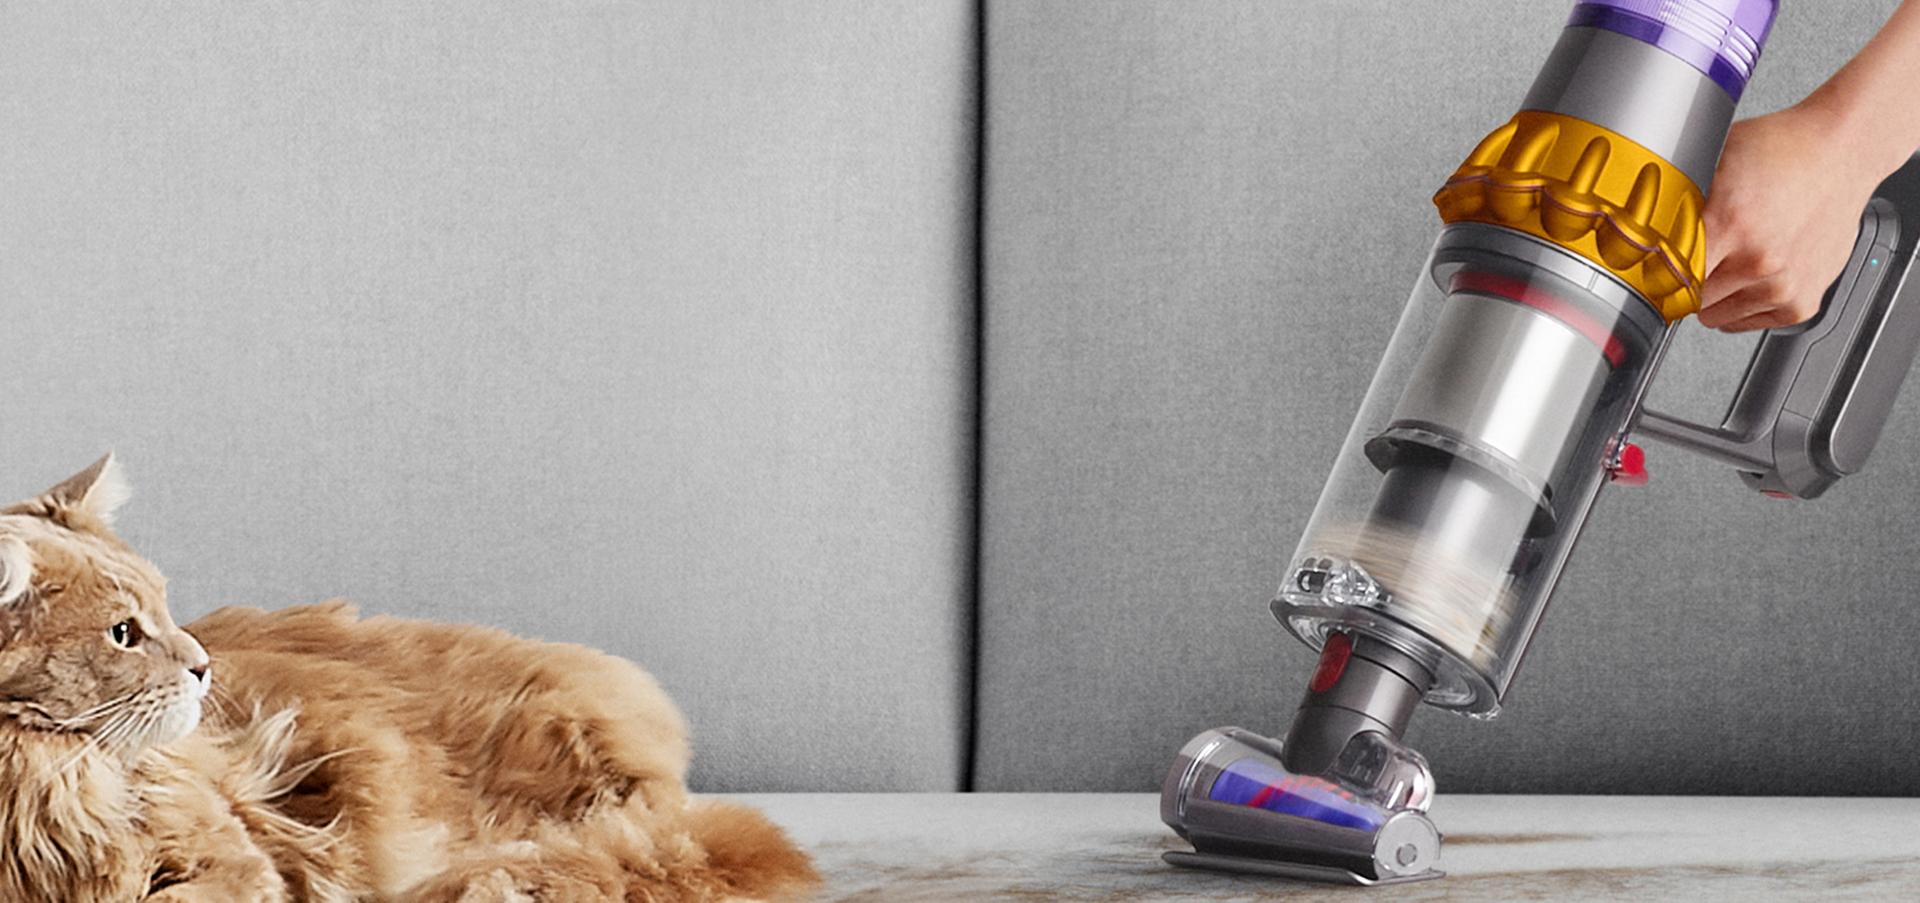 Dyson V15s with Hair screw tool in handheld mode removes fur from a sofa while a cat sits nearby.